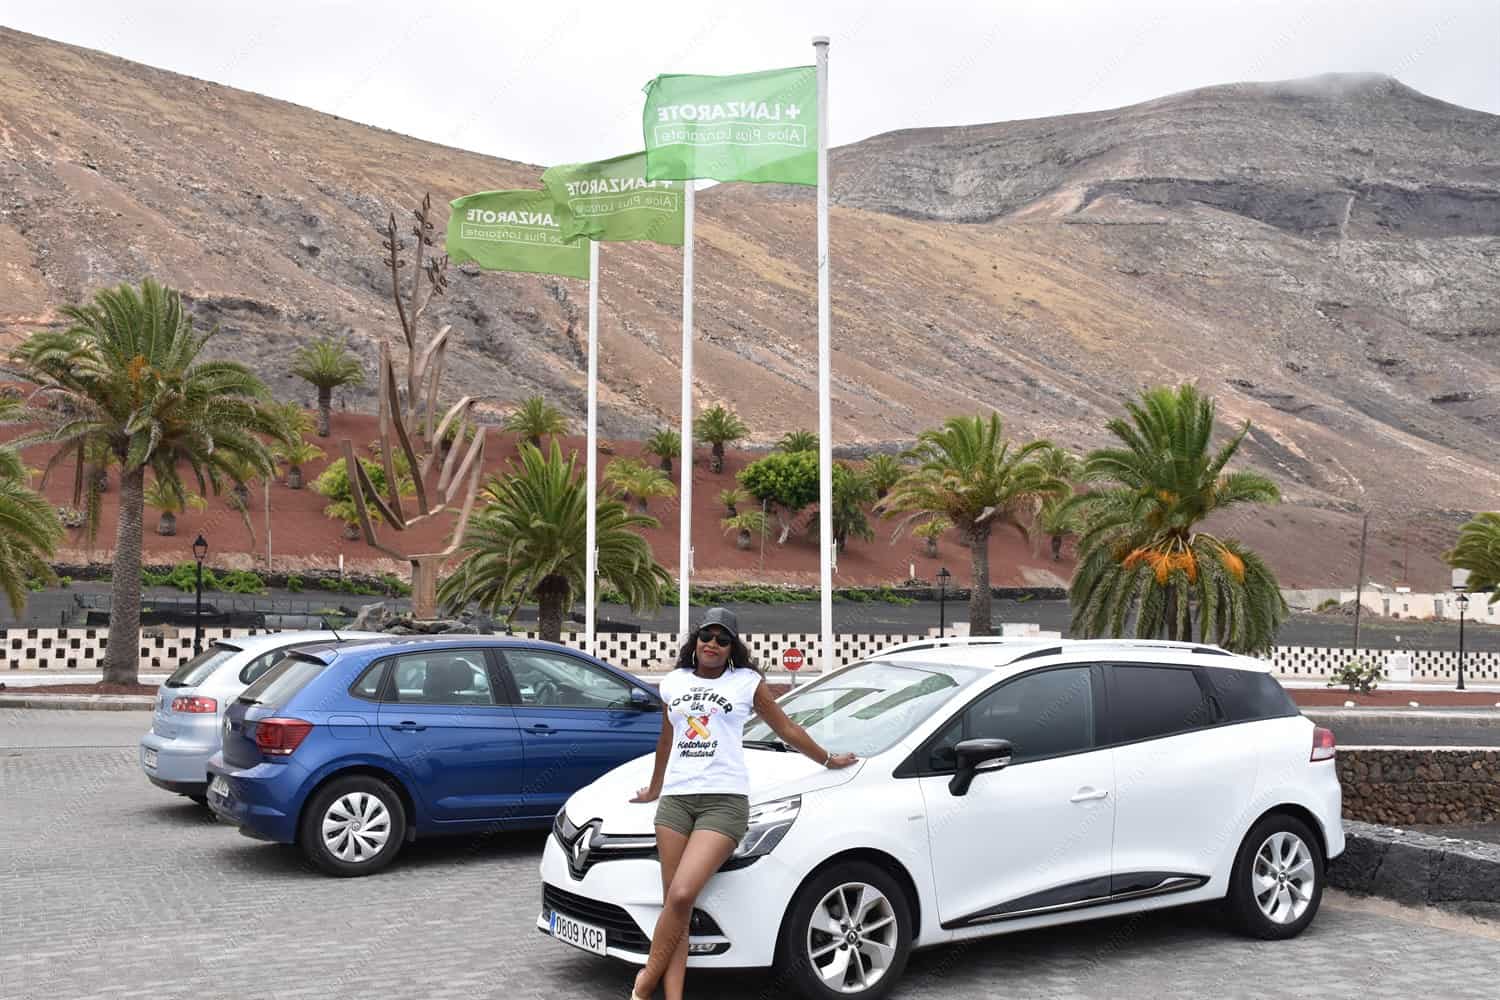 Read more about the article Aloe Vera Museum in Lanzarote